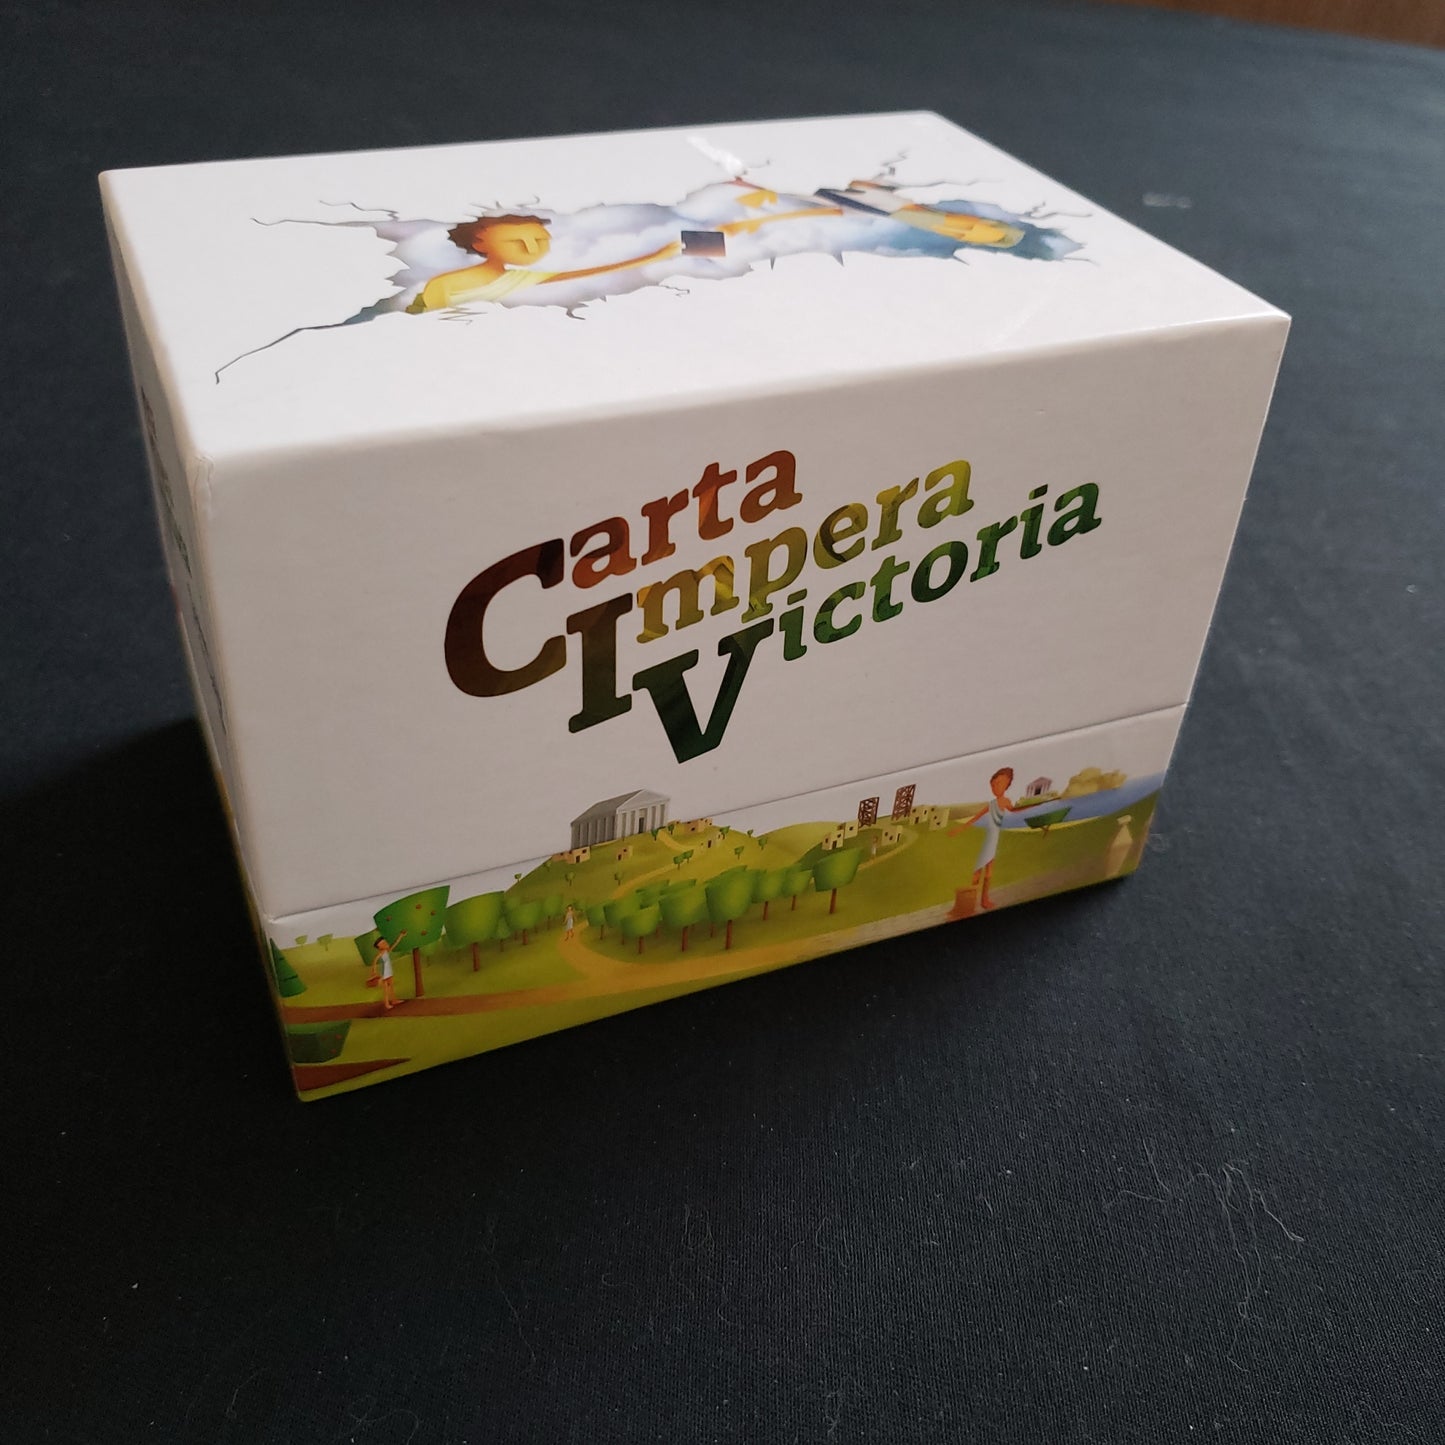 Image shows the front cover of the box of the CIV: Carta Impera Victoria board game